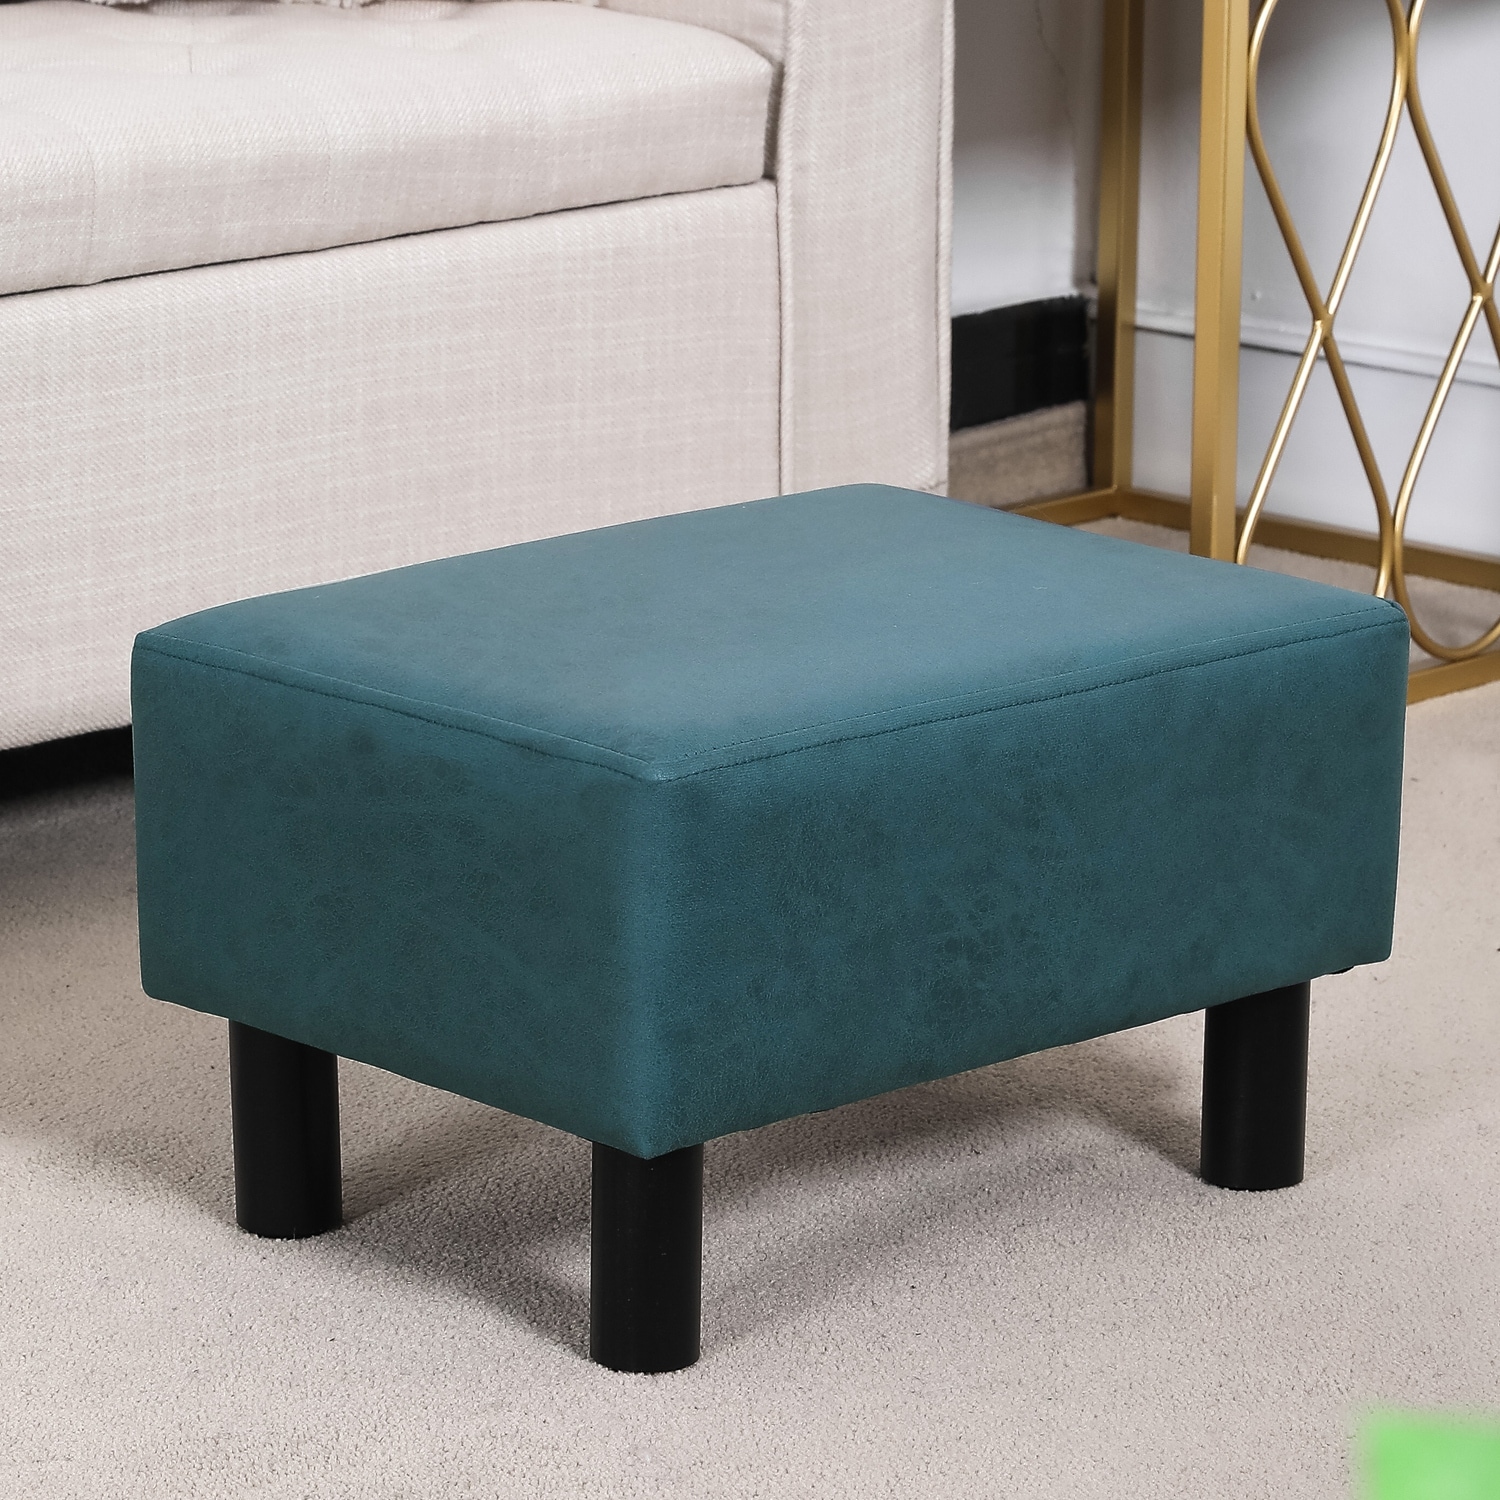 https://ak1.ostkcdn.com/images/products/is/images/direct/9674cc1d65d54b39629473d1698c2c136460bbc6/Adeco-Footstool-Ottoman-Faux-Leather-Foot-Rest-Stool.jpg